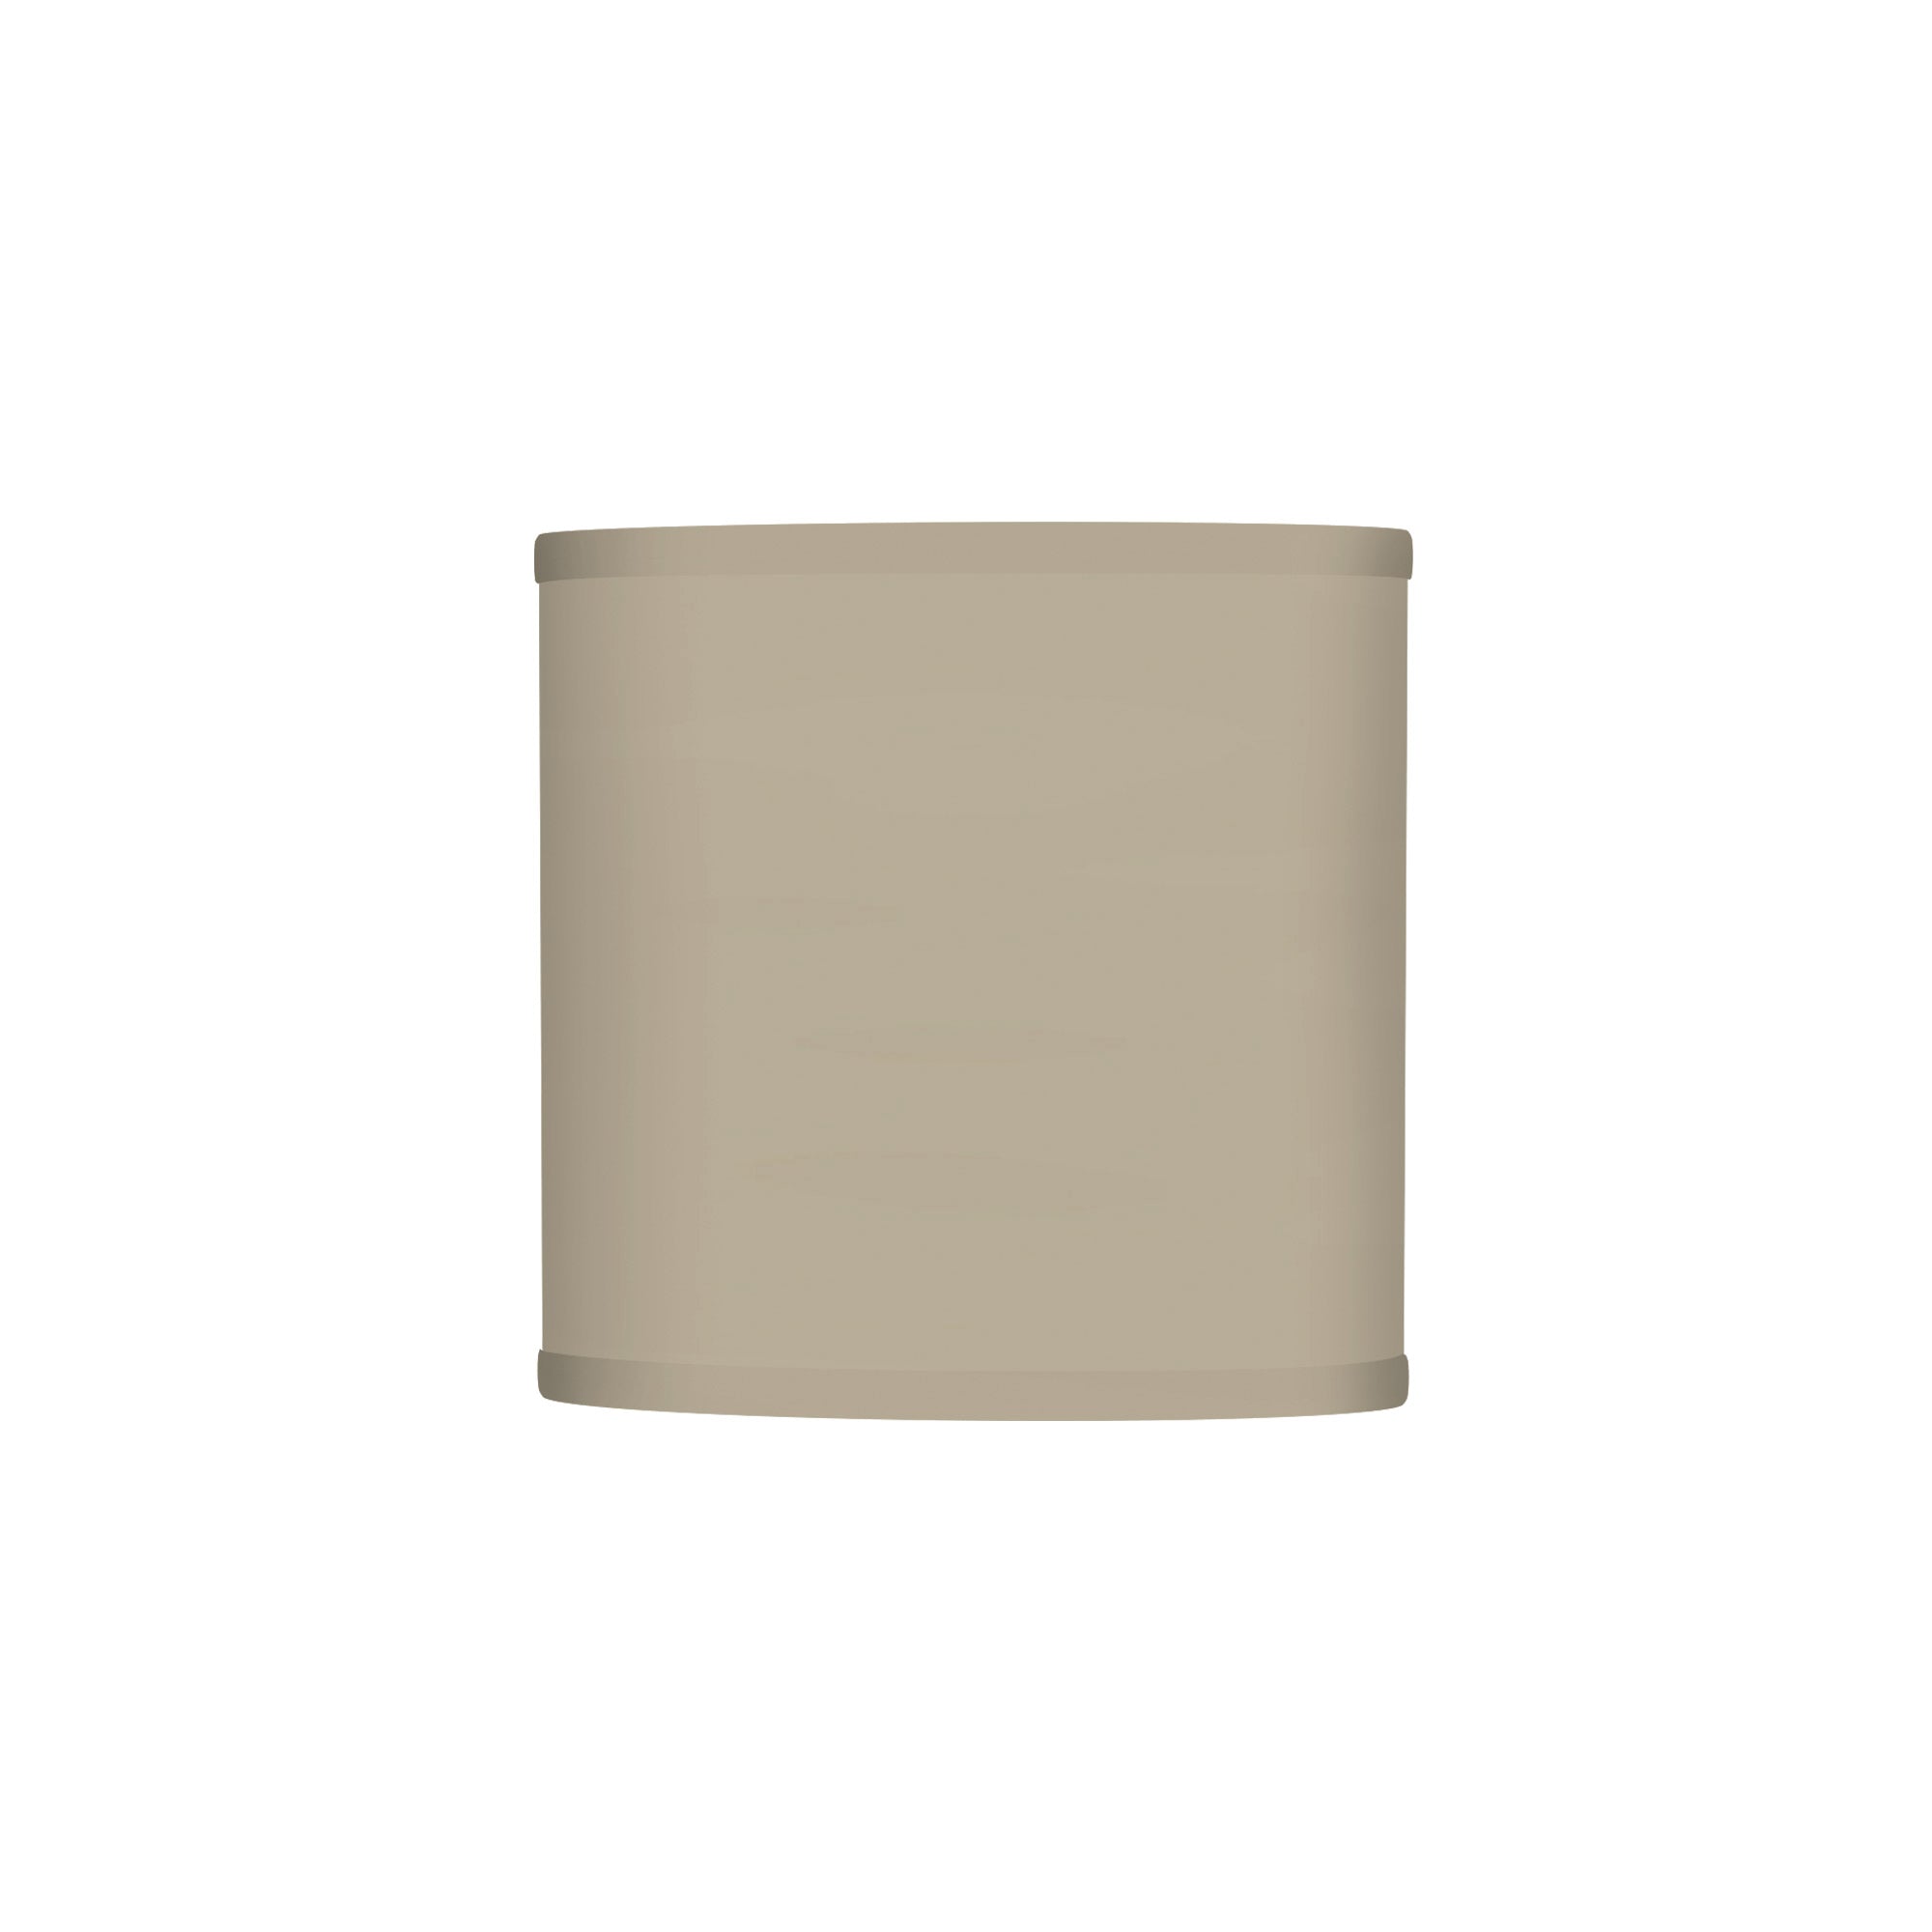 The Bryant Wall Sconce from Seascape Fixtures with a linen shade in tan color.